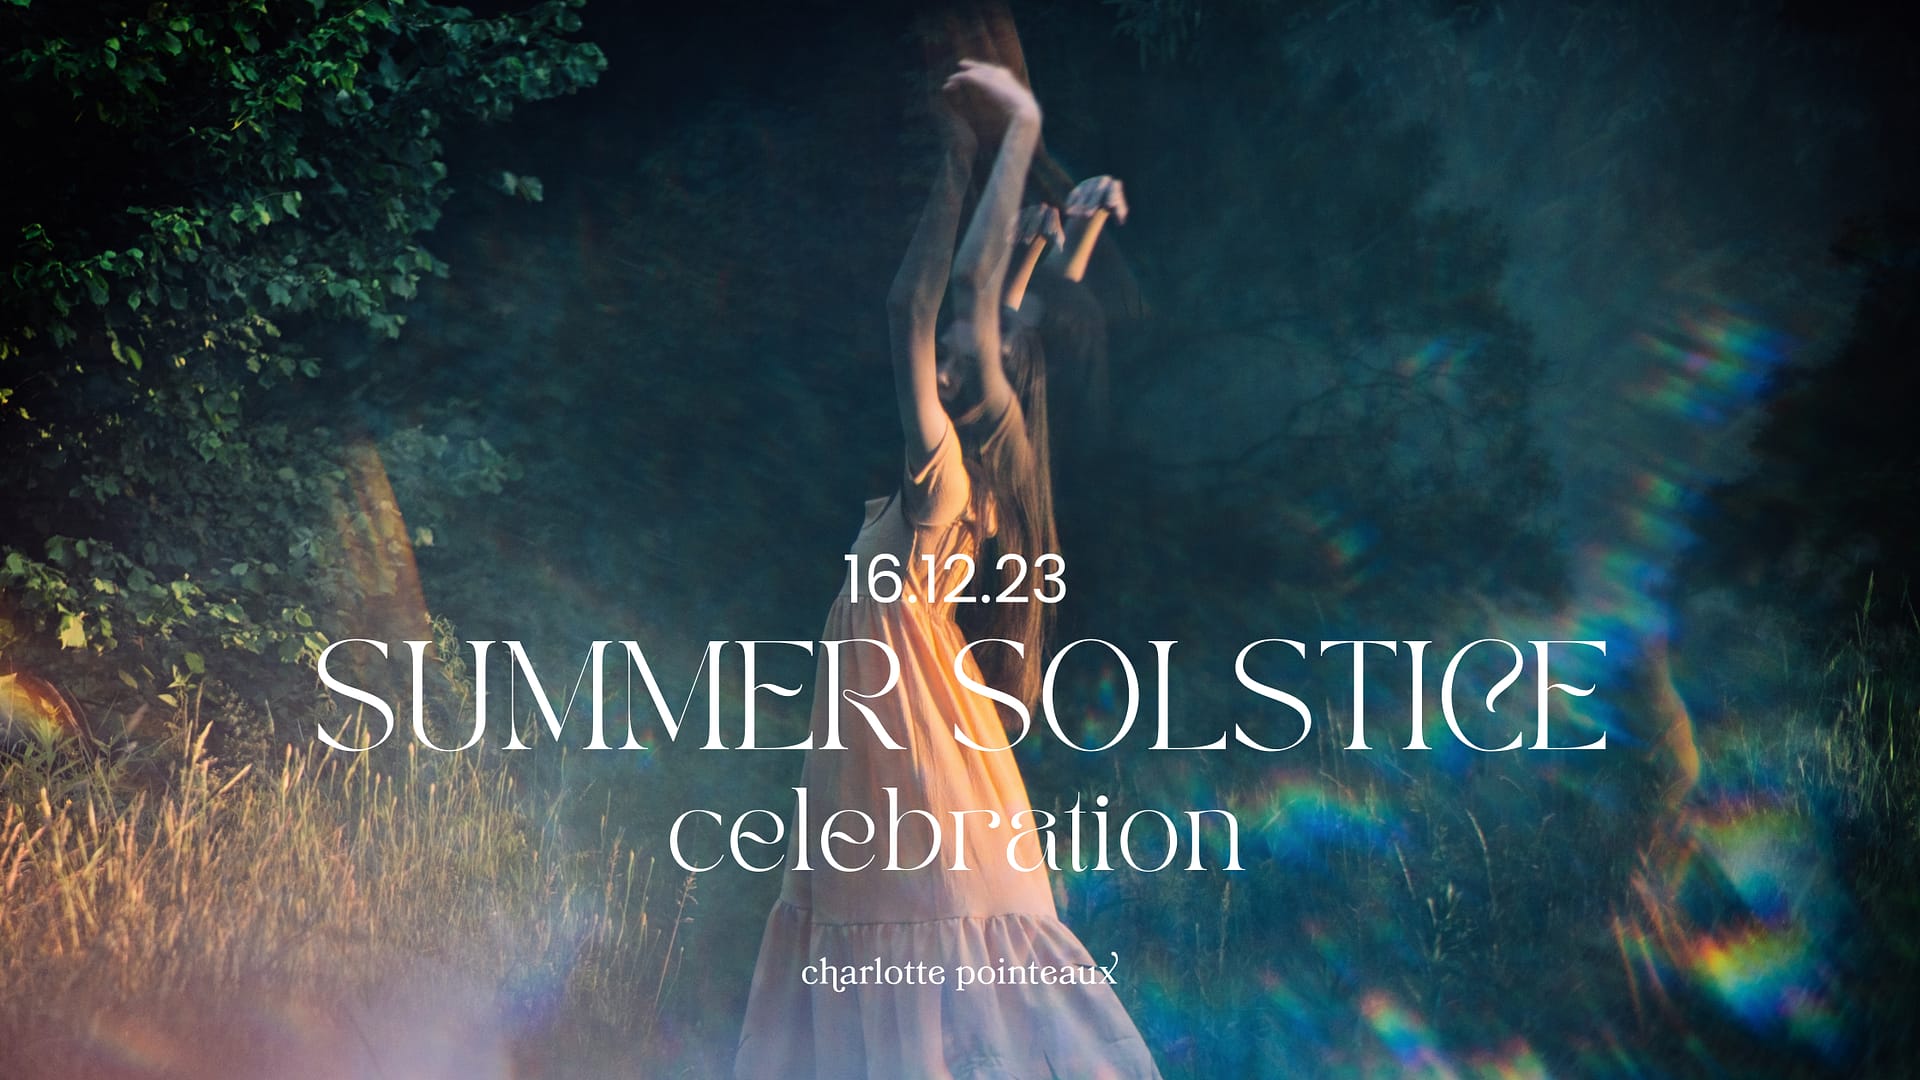 Summer solstice celebration 2023 with Charlotte Pointeaux Southern Highlands NSW